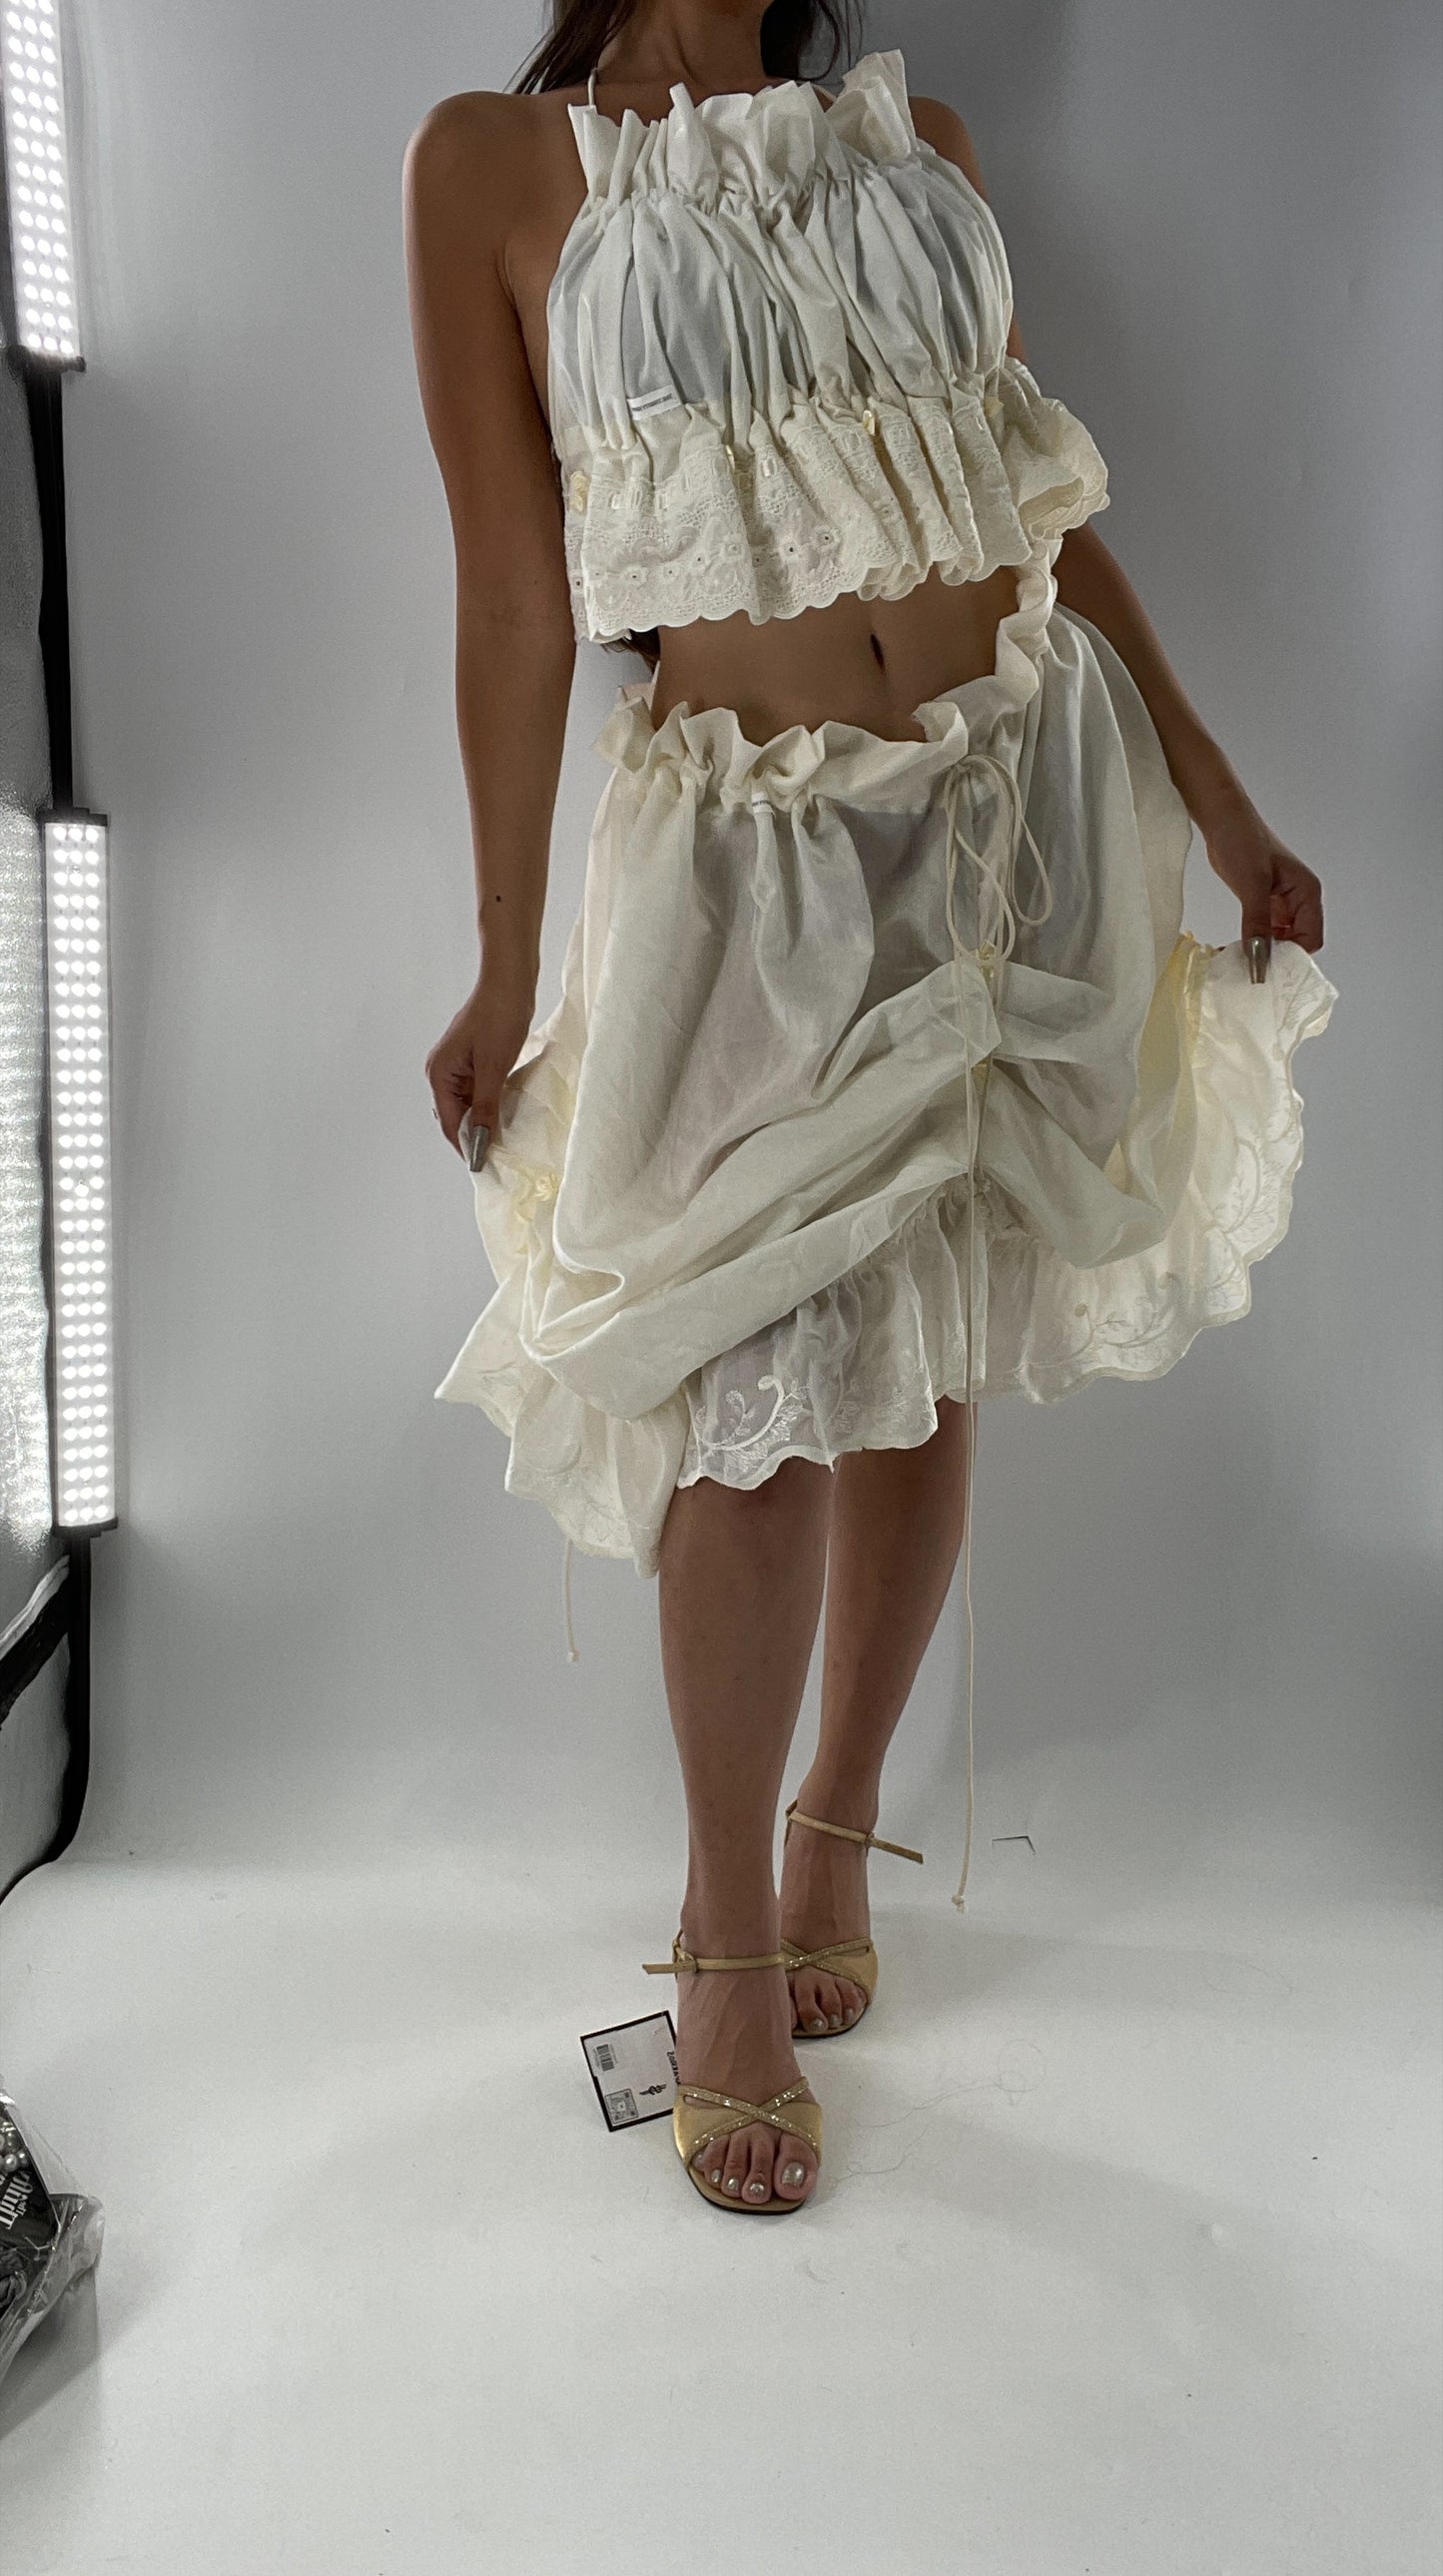 Custom Vintage Cottage Off White Set with Ruched/Scalloped Lace/Backless Top and Draping/Ribbon Skirt (One Size)